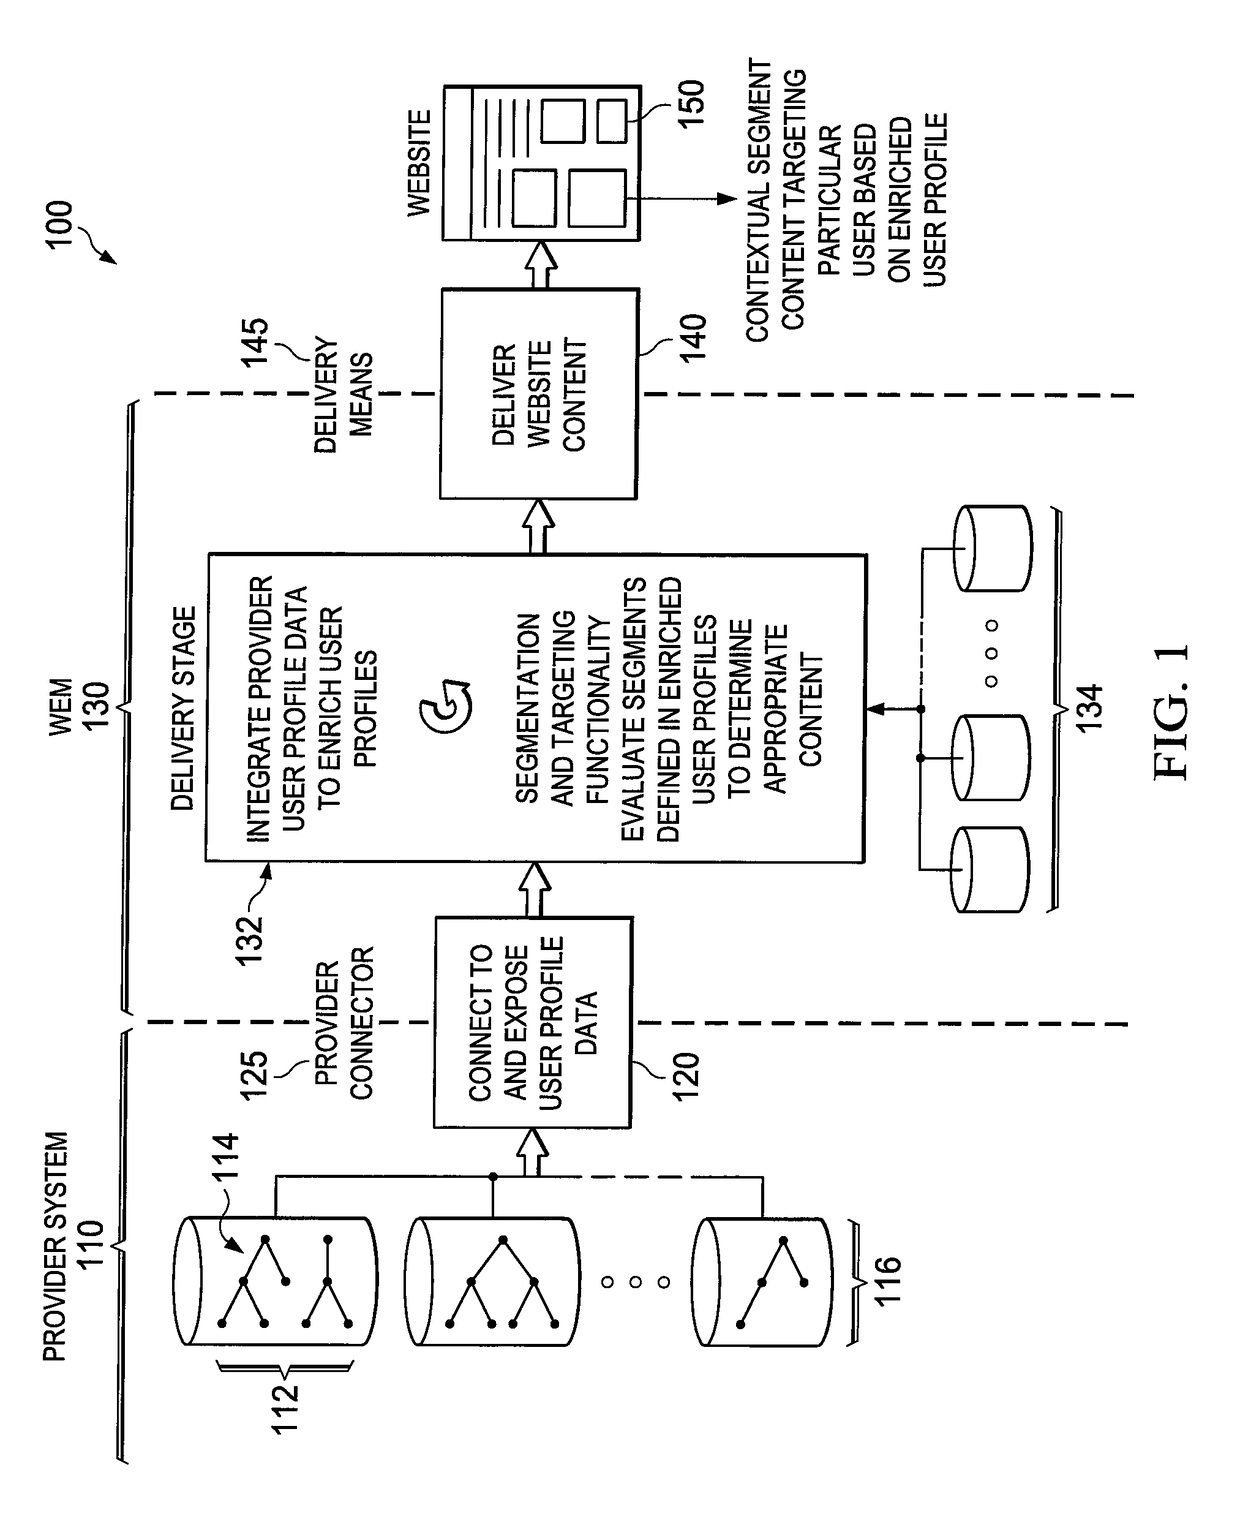 Systems, methods and computer program products for dynamic user profile enrichment and data integration